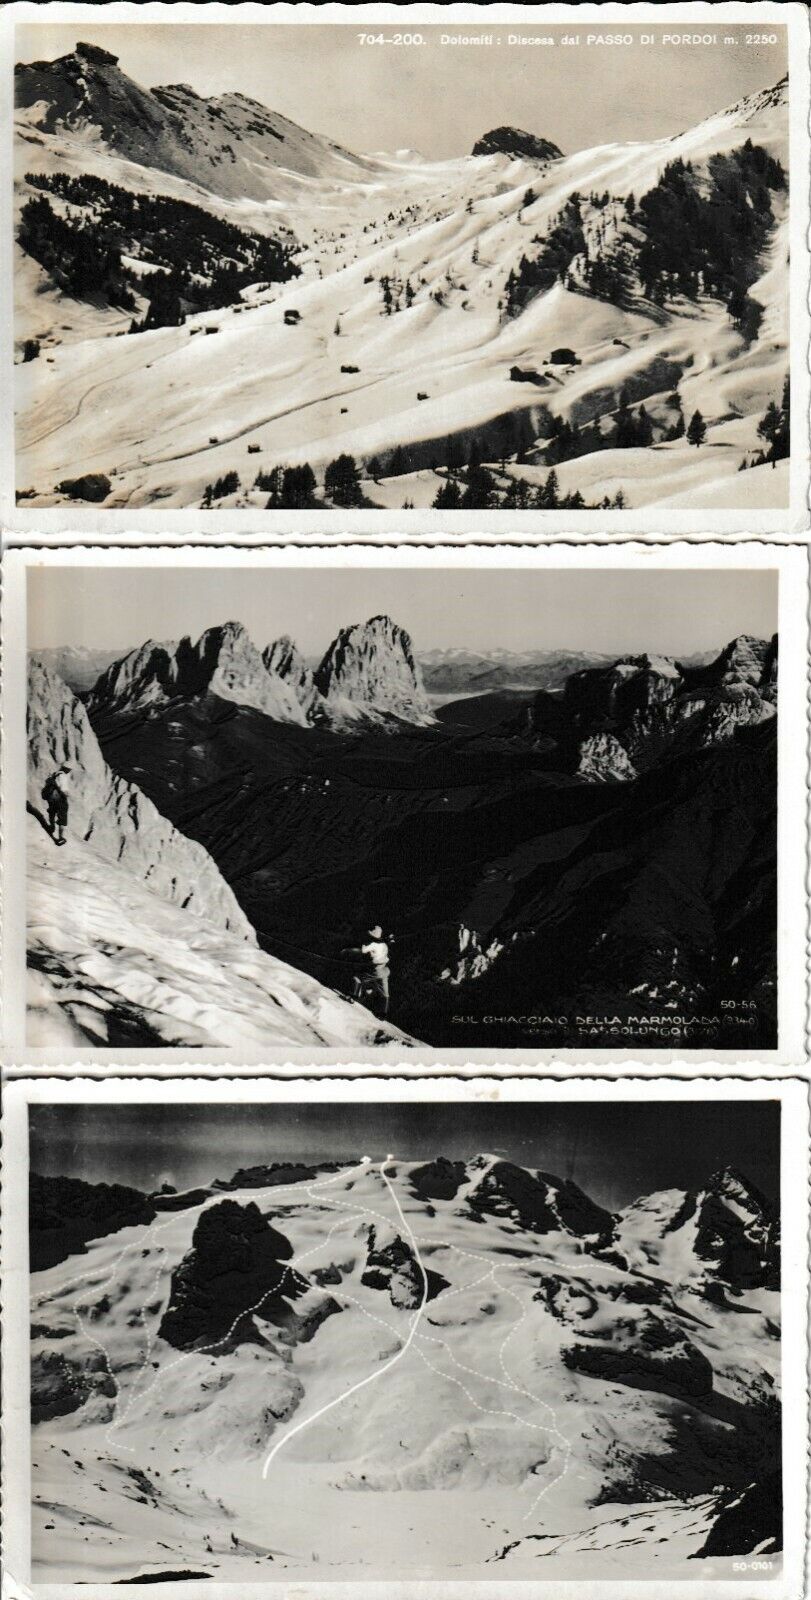 Lot of 3 Vintage RPPC Real Photo Postcards Various Scenes in the Dolomites Italy